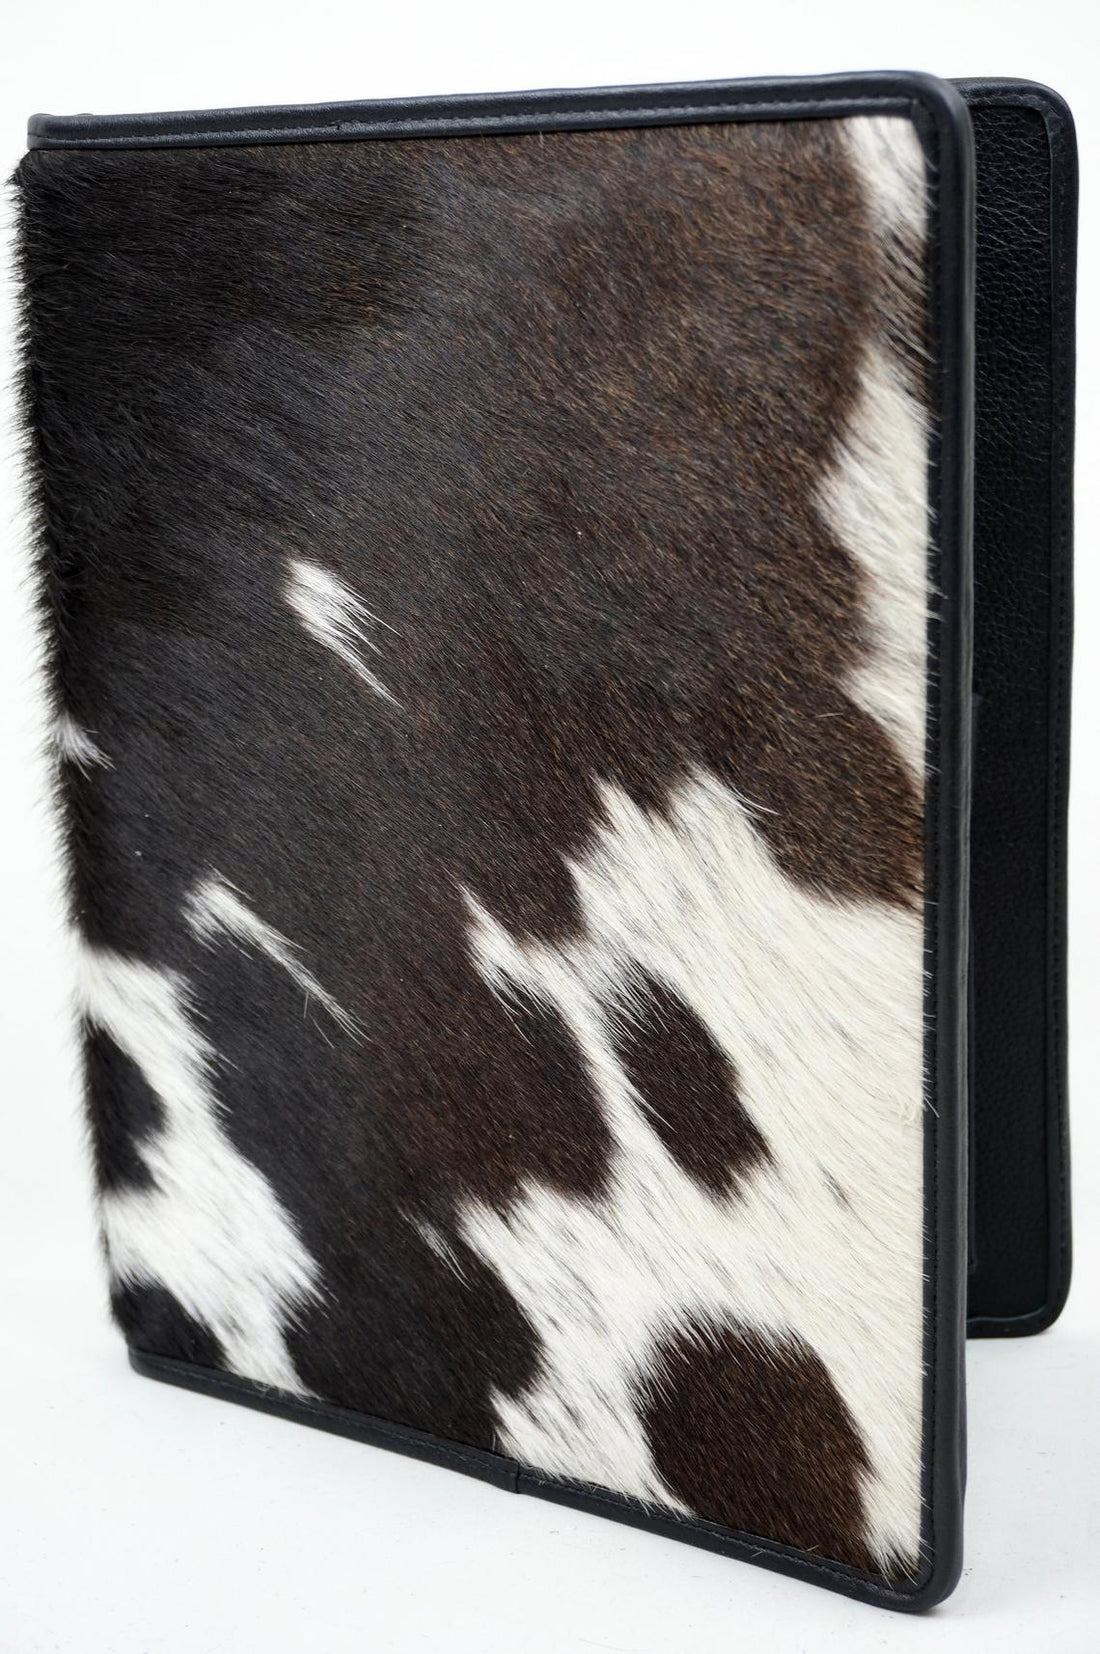 GENUINE Cowhide File Bag | Natural Hair-on Leather Office File Cover | Real Cow Skin Documents Bag | FC02